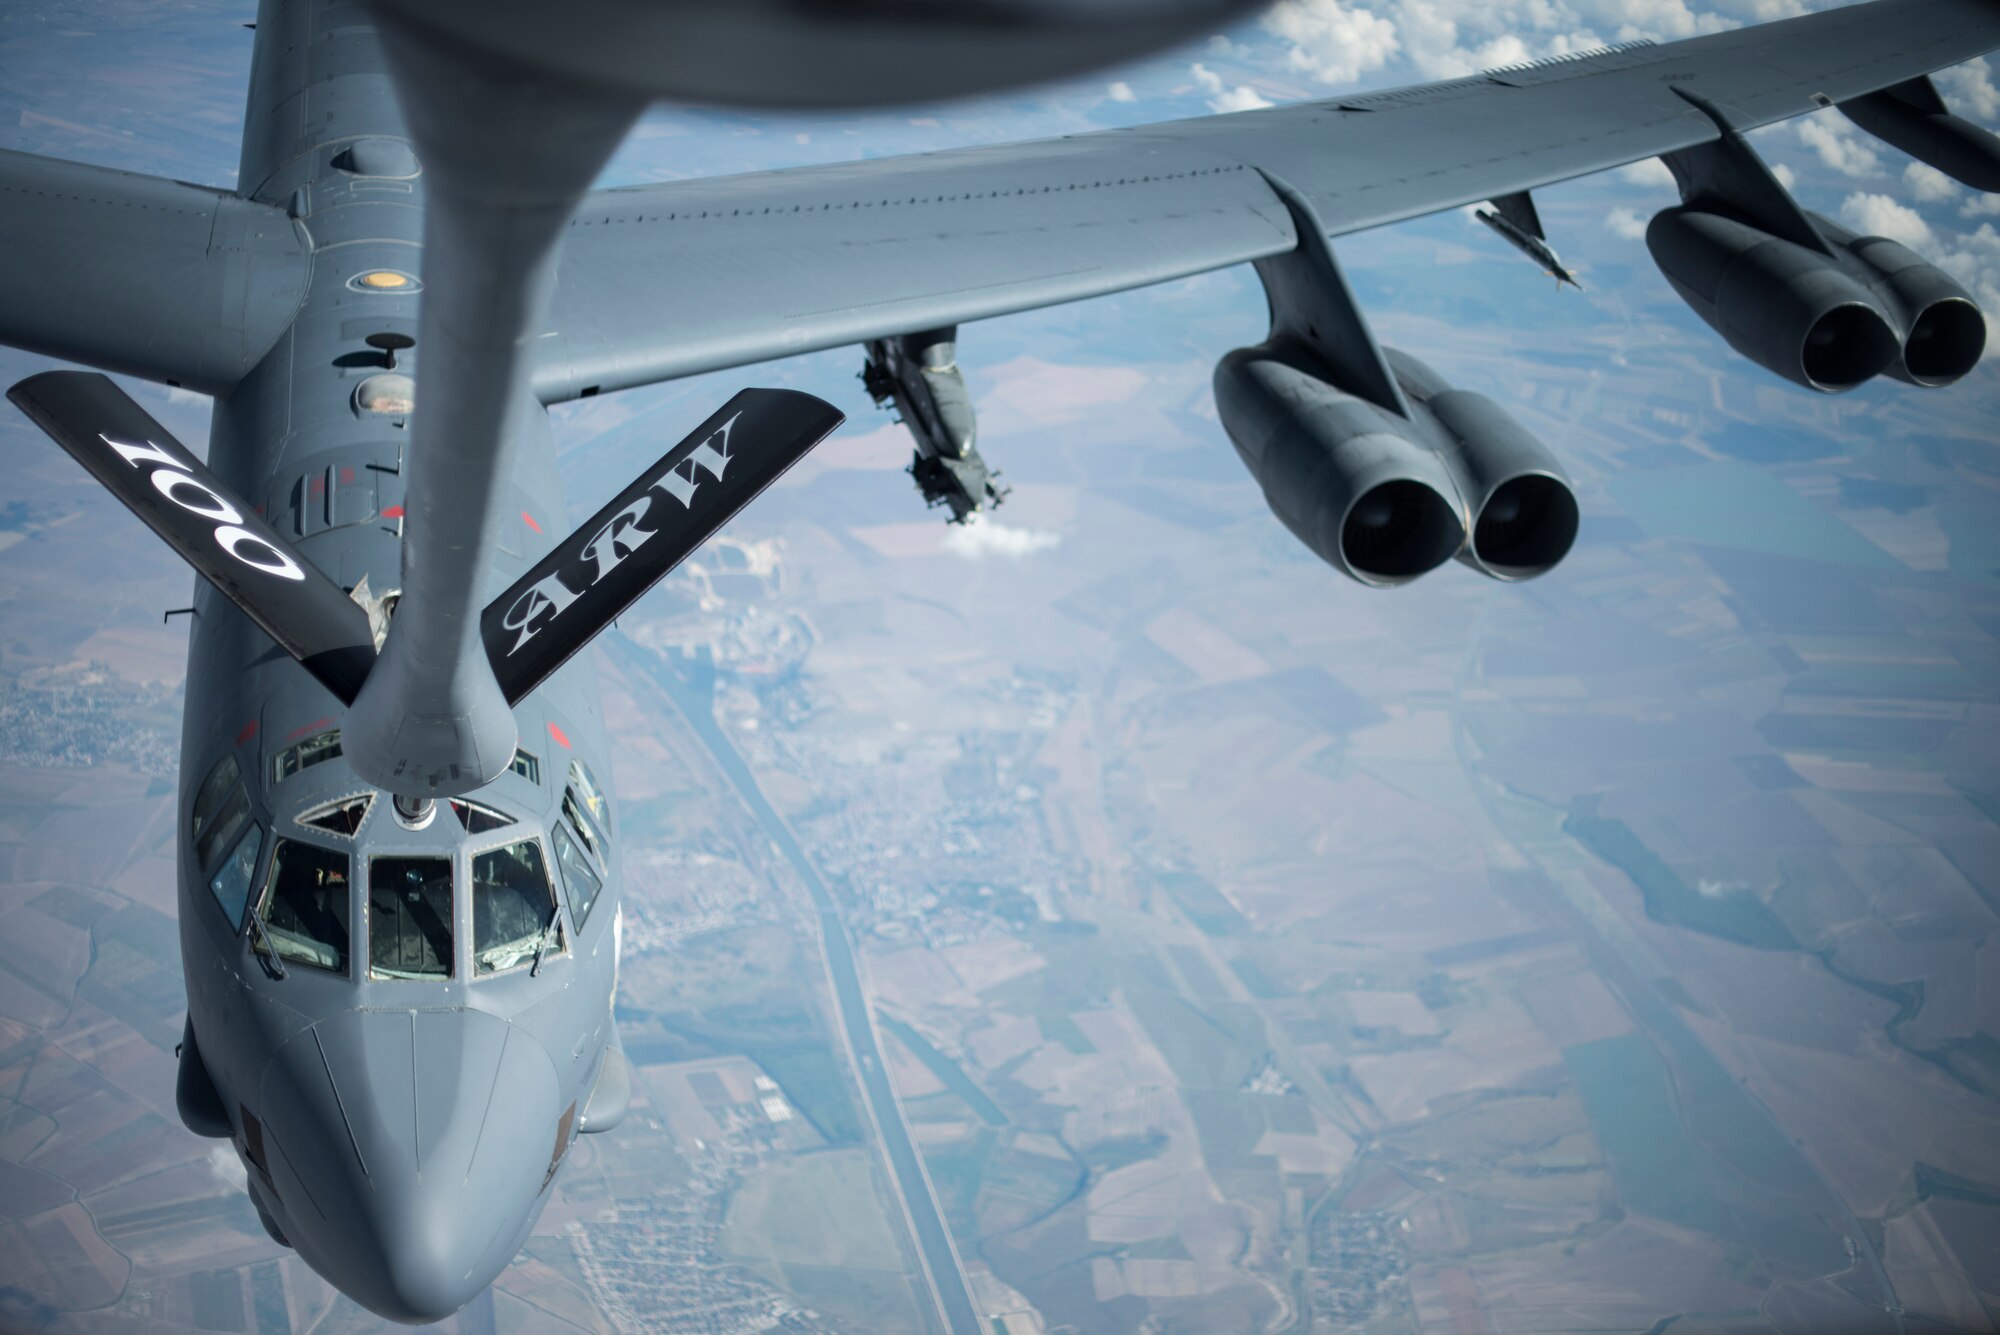 A U.S. Air Force B-52 Stratofortress recives fuel from a KC-135 Stratotanker from the 100th Air Refueling Wing, RAF Mildenhall, England, before receiving fuel over Romania Sept. 13, 2018. Training with NATO allies such Romania improves interoperability and demonstrates the United States’ commitment to regional security. (U.S. Air Force photo by Tech. Sgt. Emerson Nuñez)